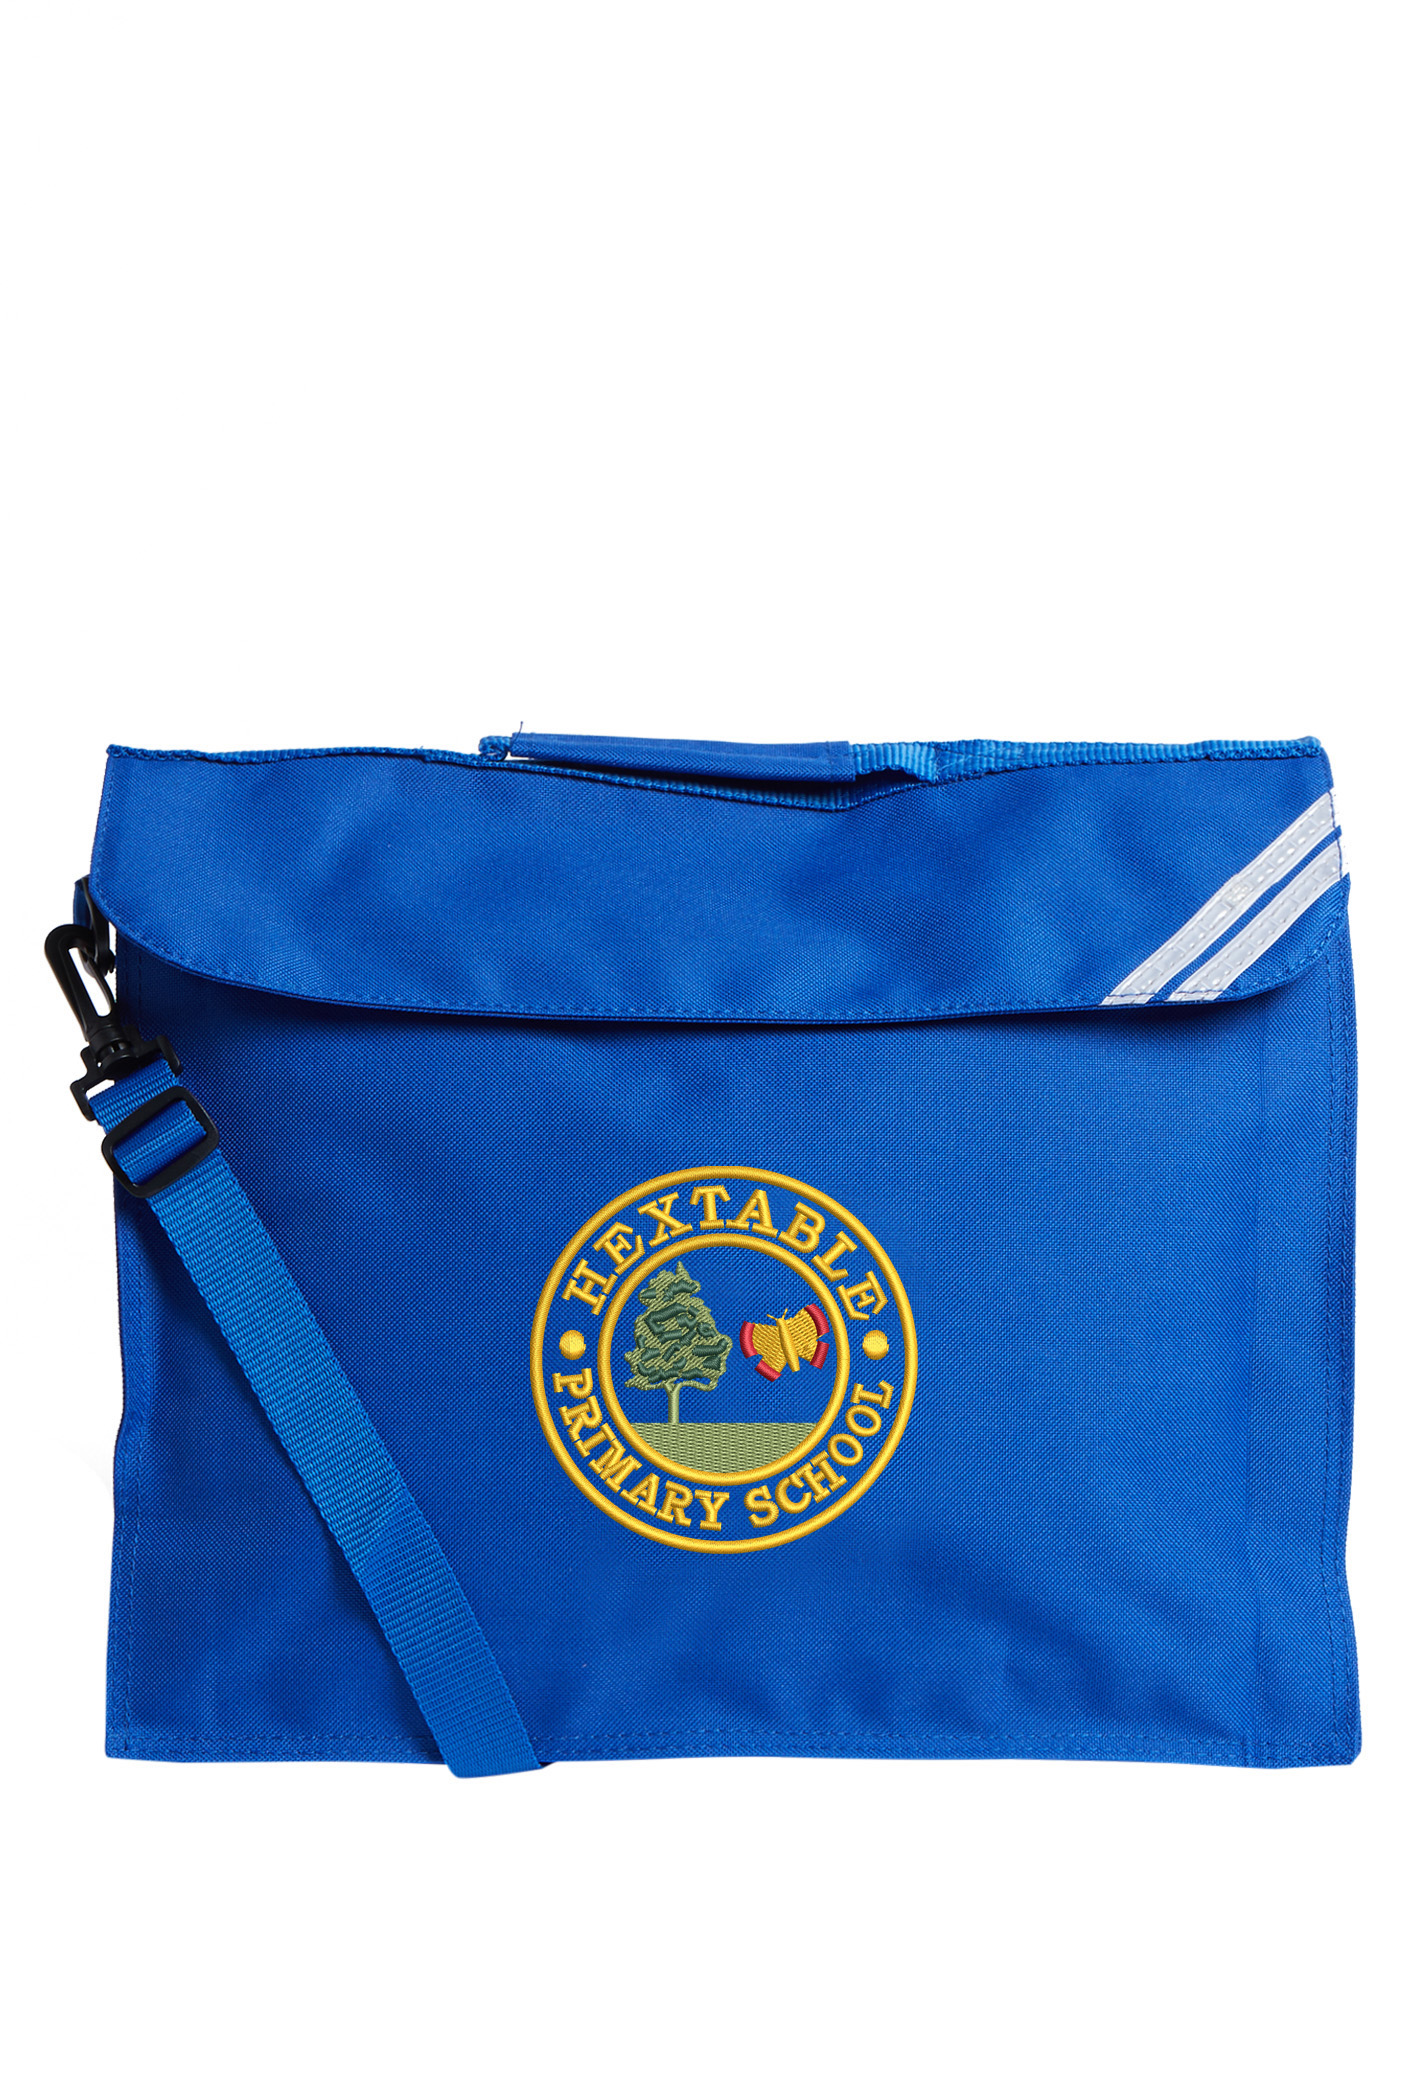 Hextable Primary School Embroidered Royal Blue Book Bag